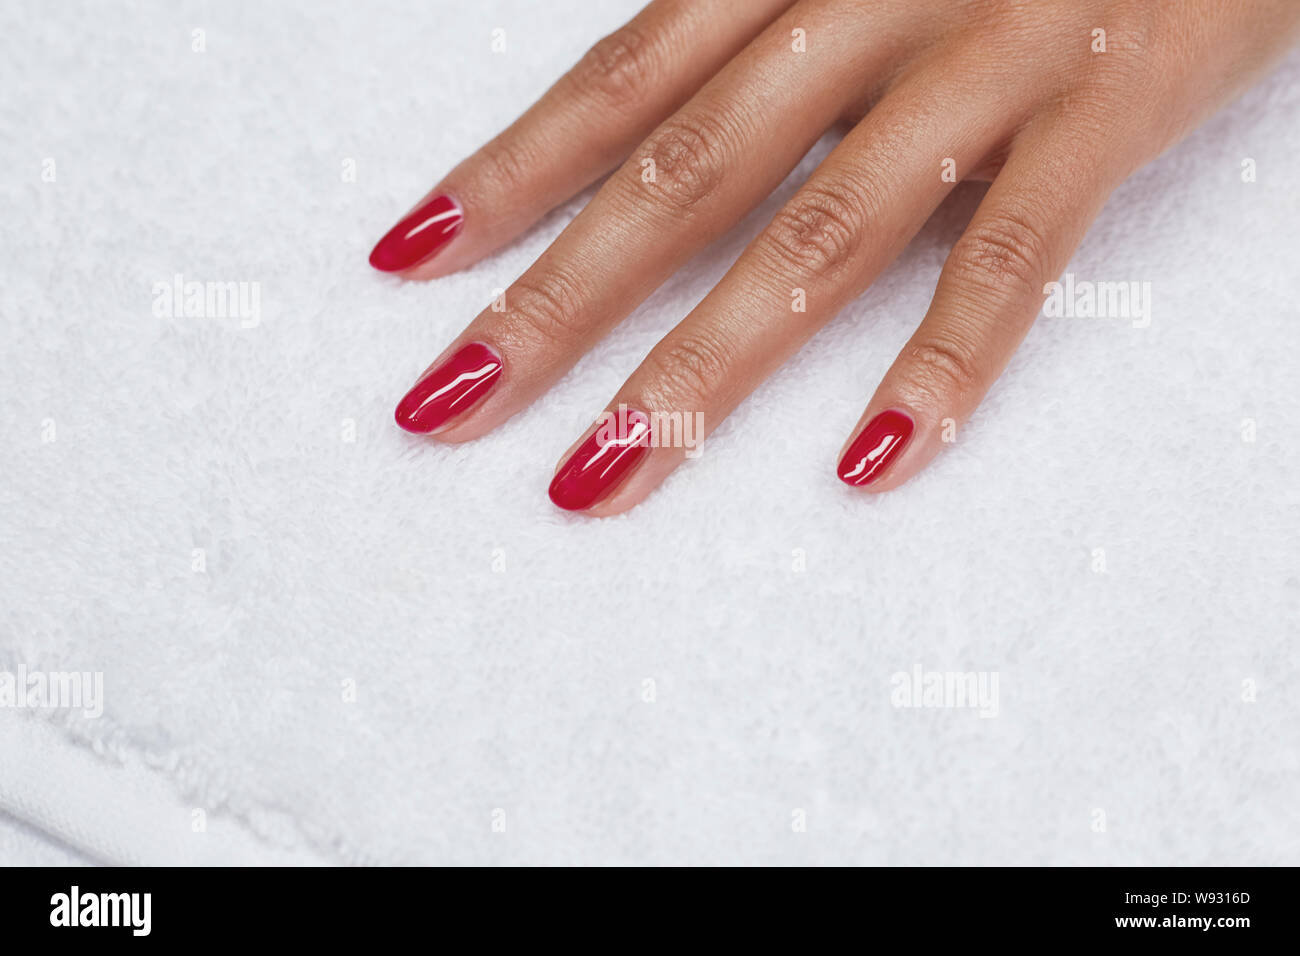 Woman red nail polish manicure, hand spa treatment on white towel Stock Photo